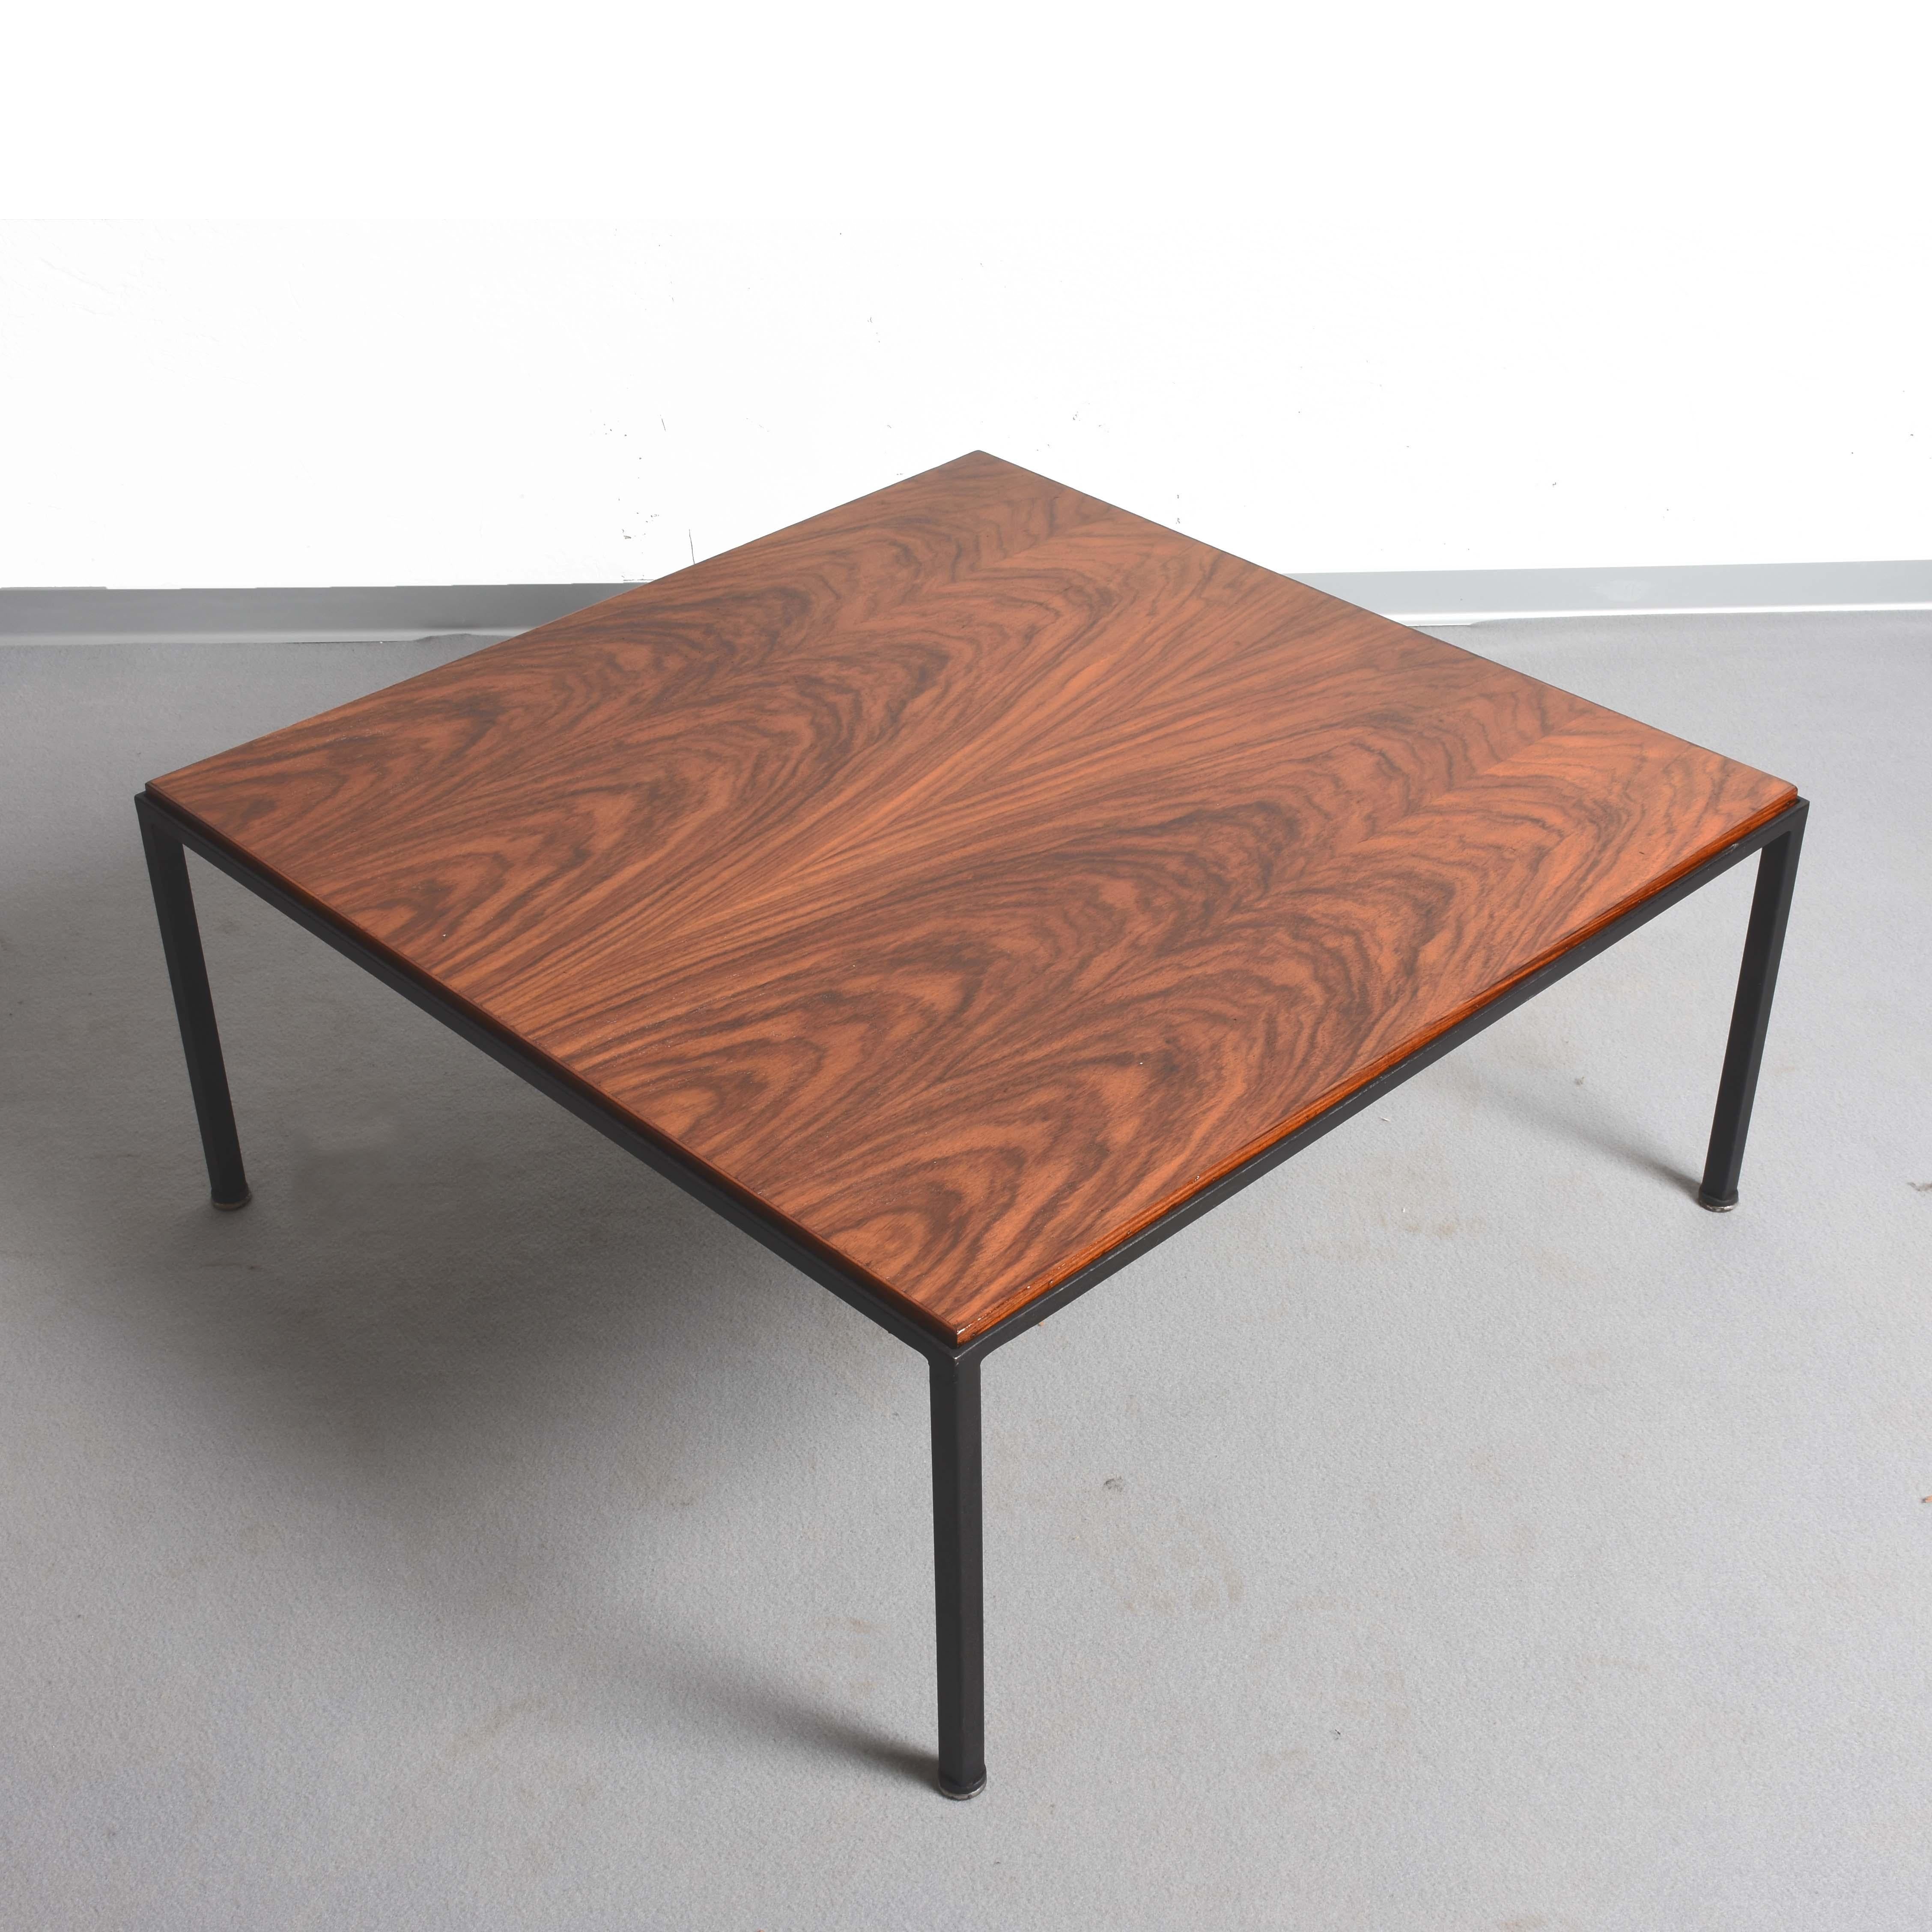 Late 20th Century Italian Design Midcentury Wood and Iron Square Coffee Italian Table, 1960s For Sale